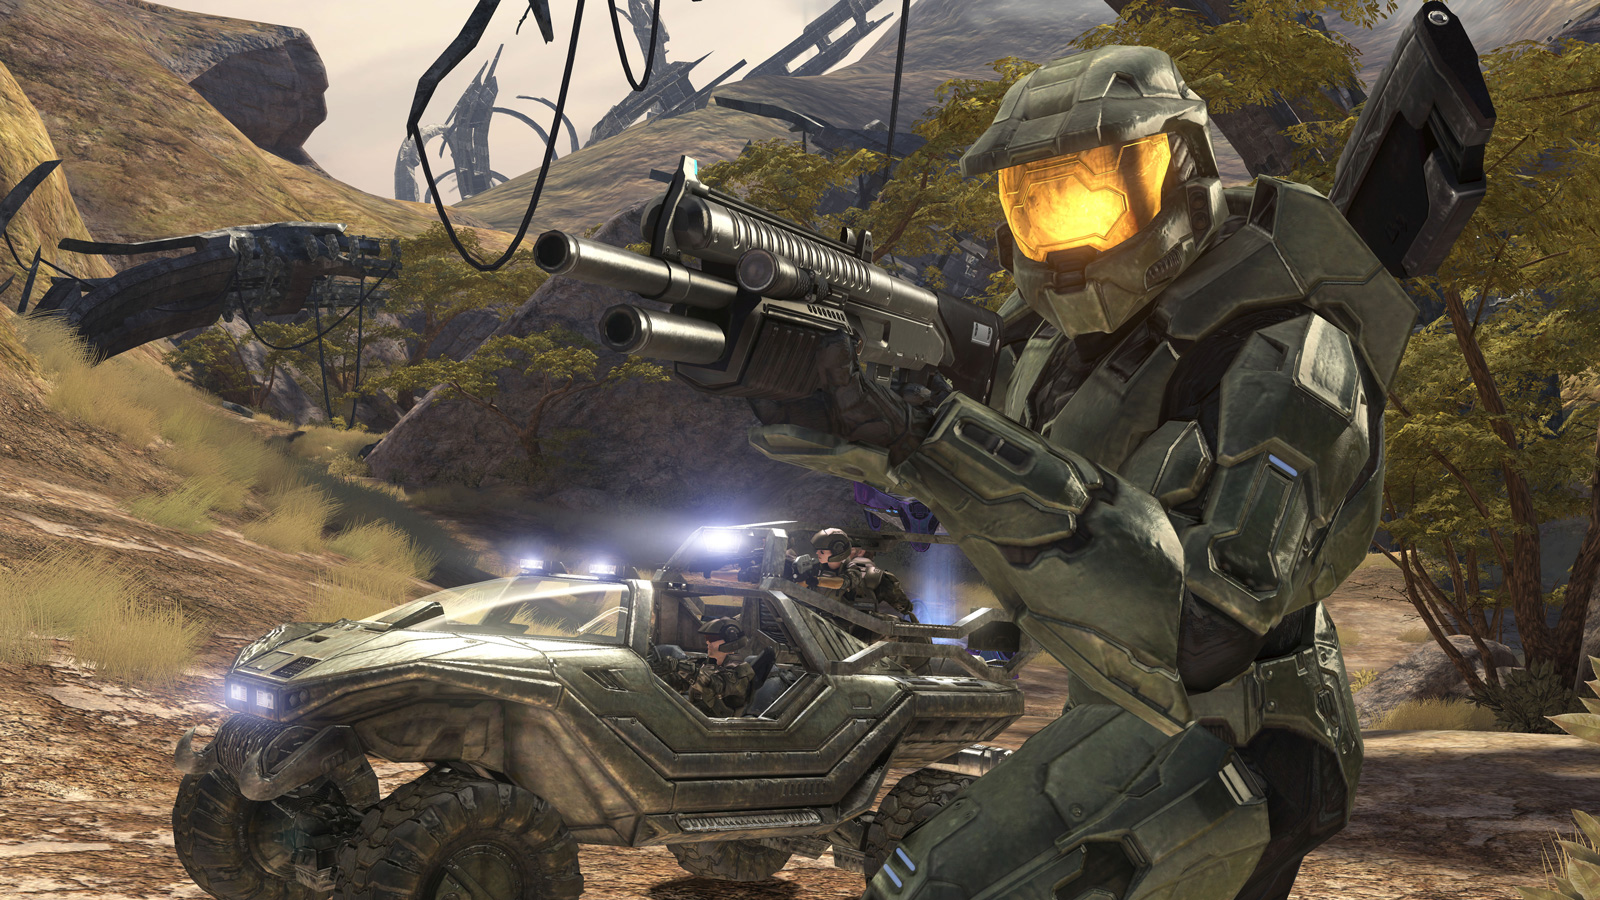 Halo full version pc game download